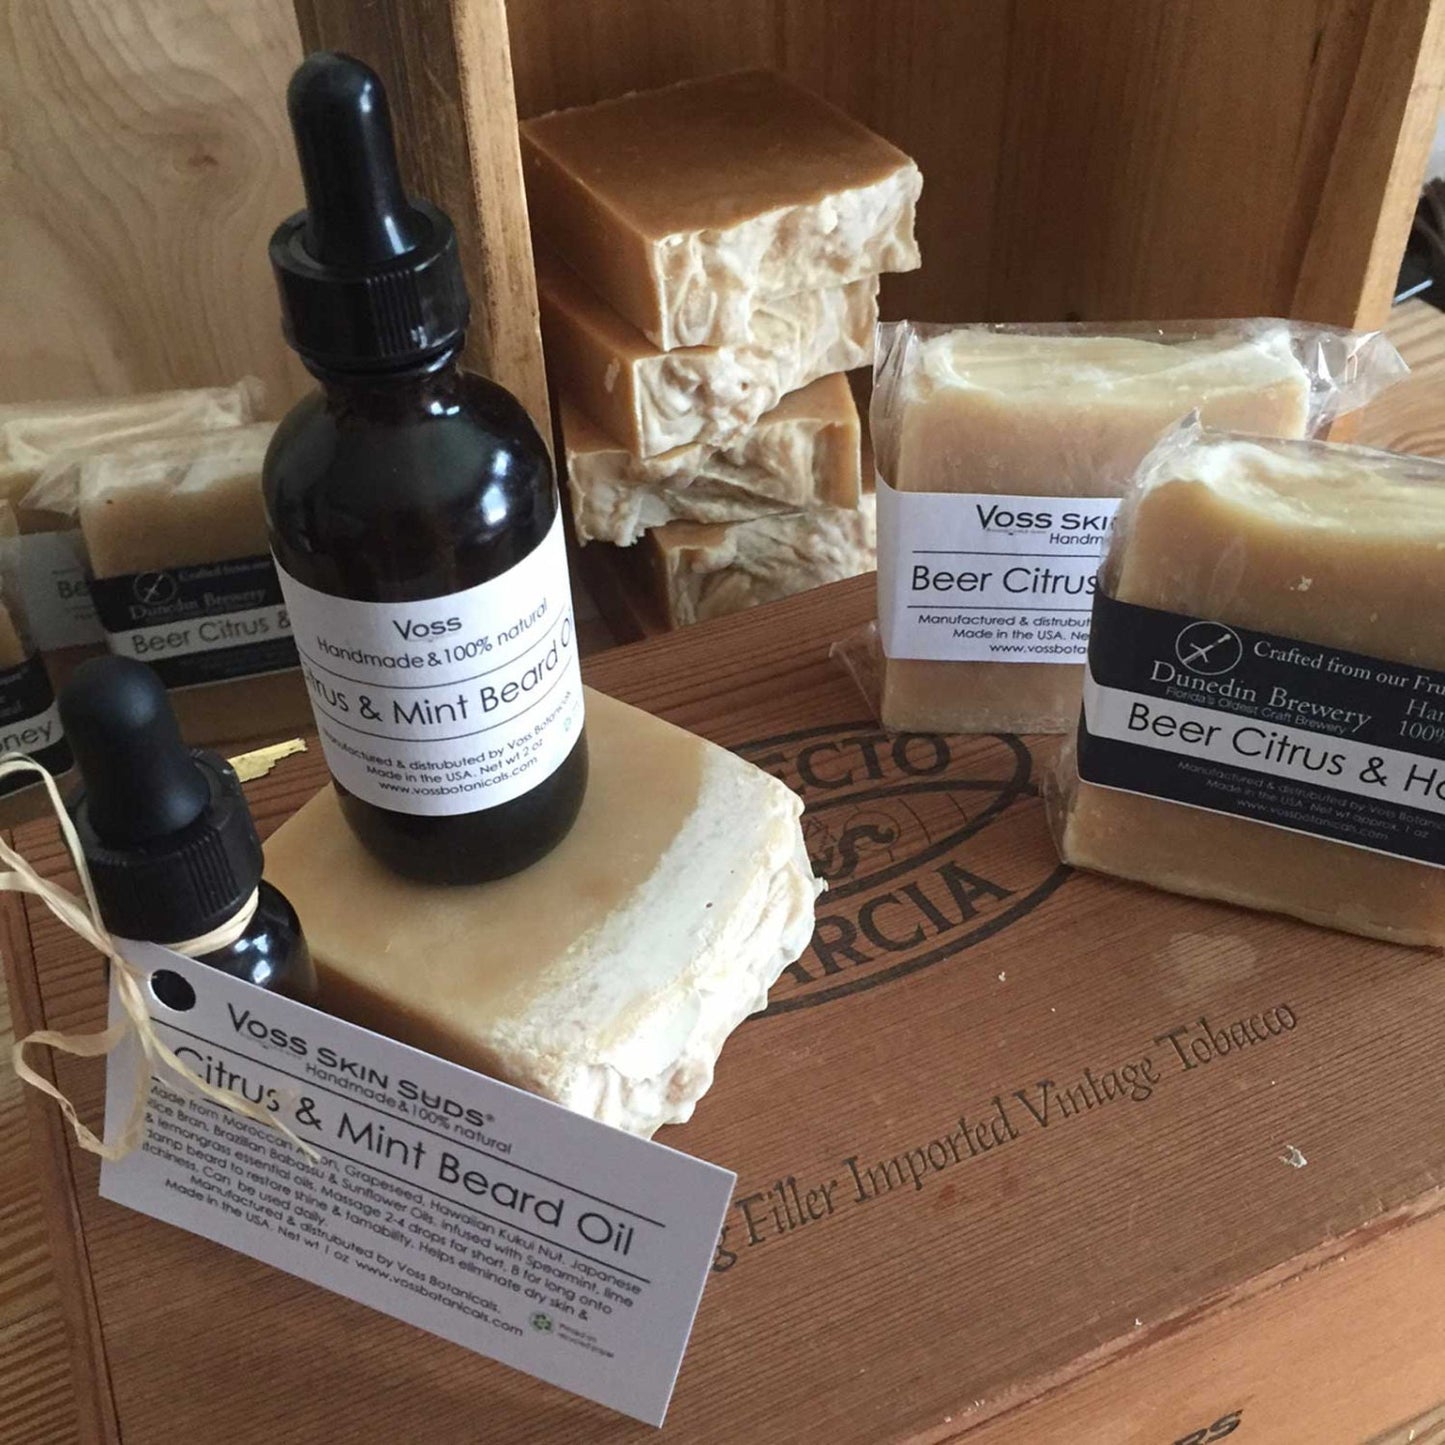 Beard oil and beer soap for men PRODUCT FOOTPRINTS Natural ingredients Phthalate, Sulfate, Petroleum & Paraben Free Vegan Free of Synthetic Fragrances Free of Synthetic Dyes GMO & Gluten-free Non Toxic Handmade Sustainable Innovation Made in the USA Cruelty Free Zero Waste Low Carbon Footprint eco friendly   Holiday care package gift box gift for bearded man relaxation gift self care box self care gift box spa gift box spa gift set thank you gift box birthday gift new dad gift spa gift set spa kit